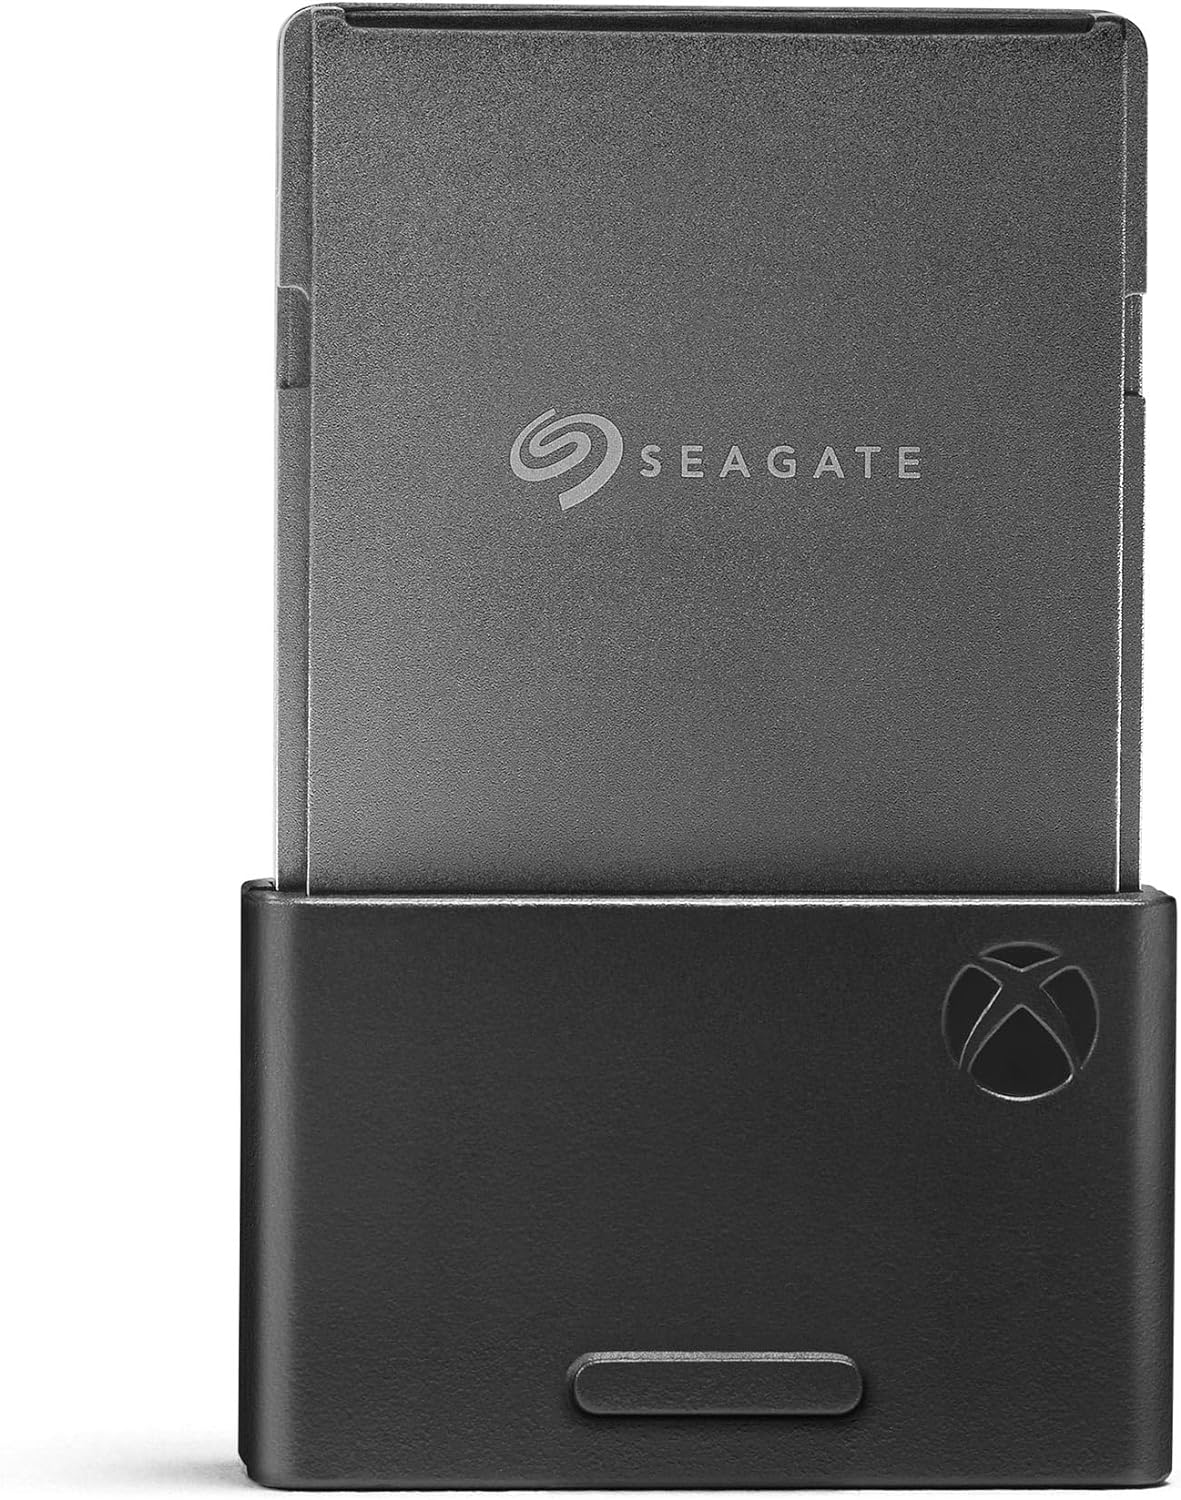 2TB  Seagate NVMe SSD for Xbox Series X|S (STJR2000400) $229.99 @ Amazon